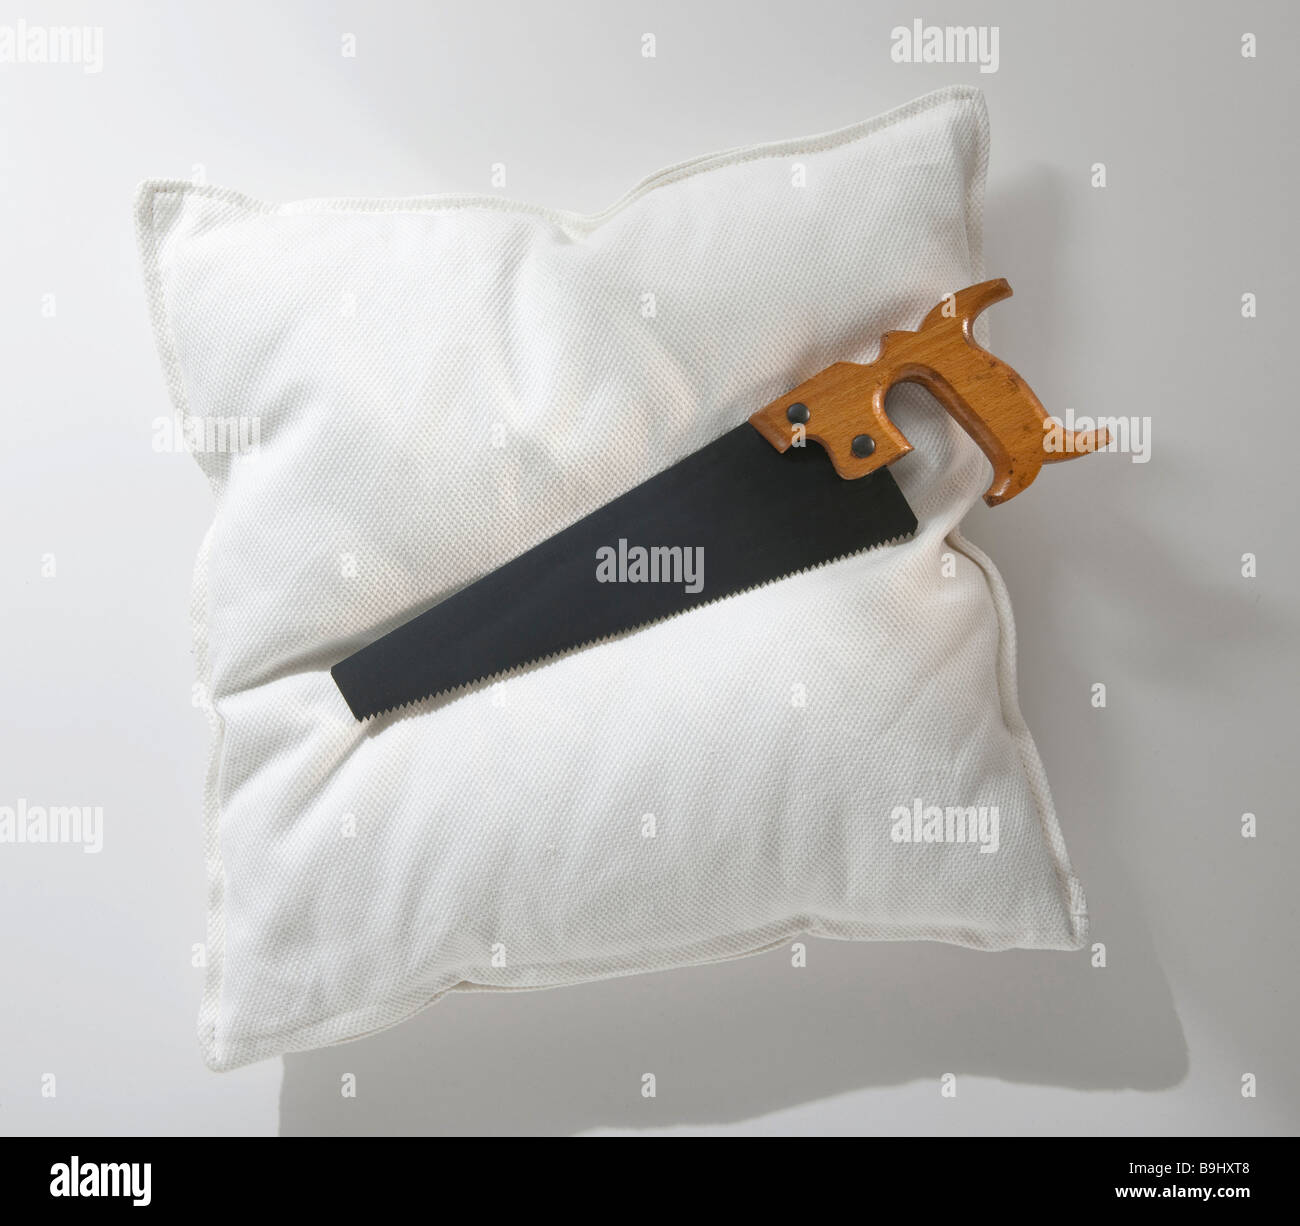 Pillow, saw, symbolic picture for snoring Stock Photo